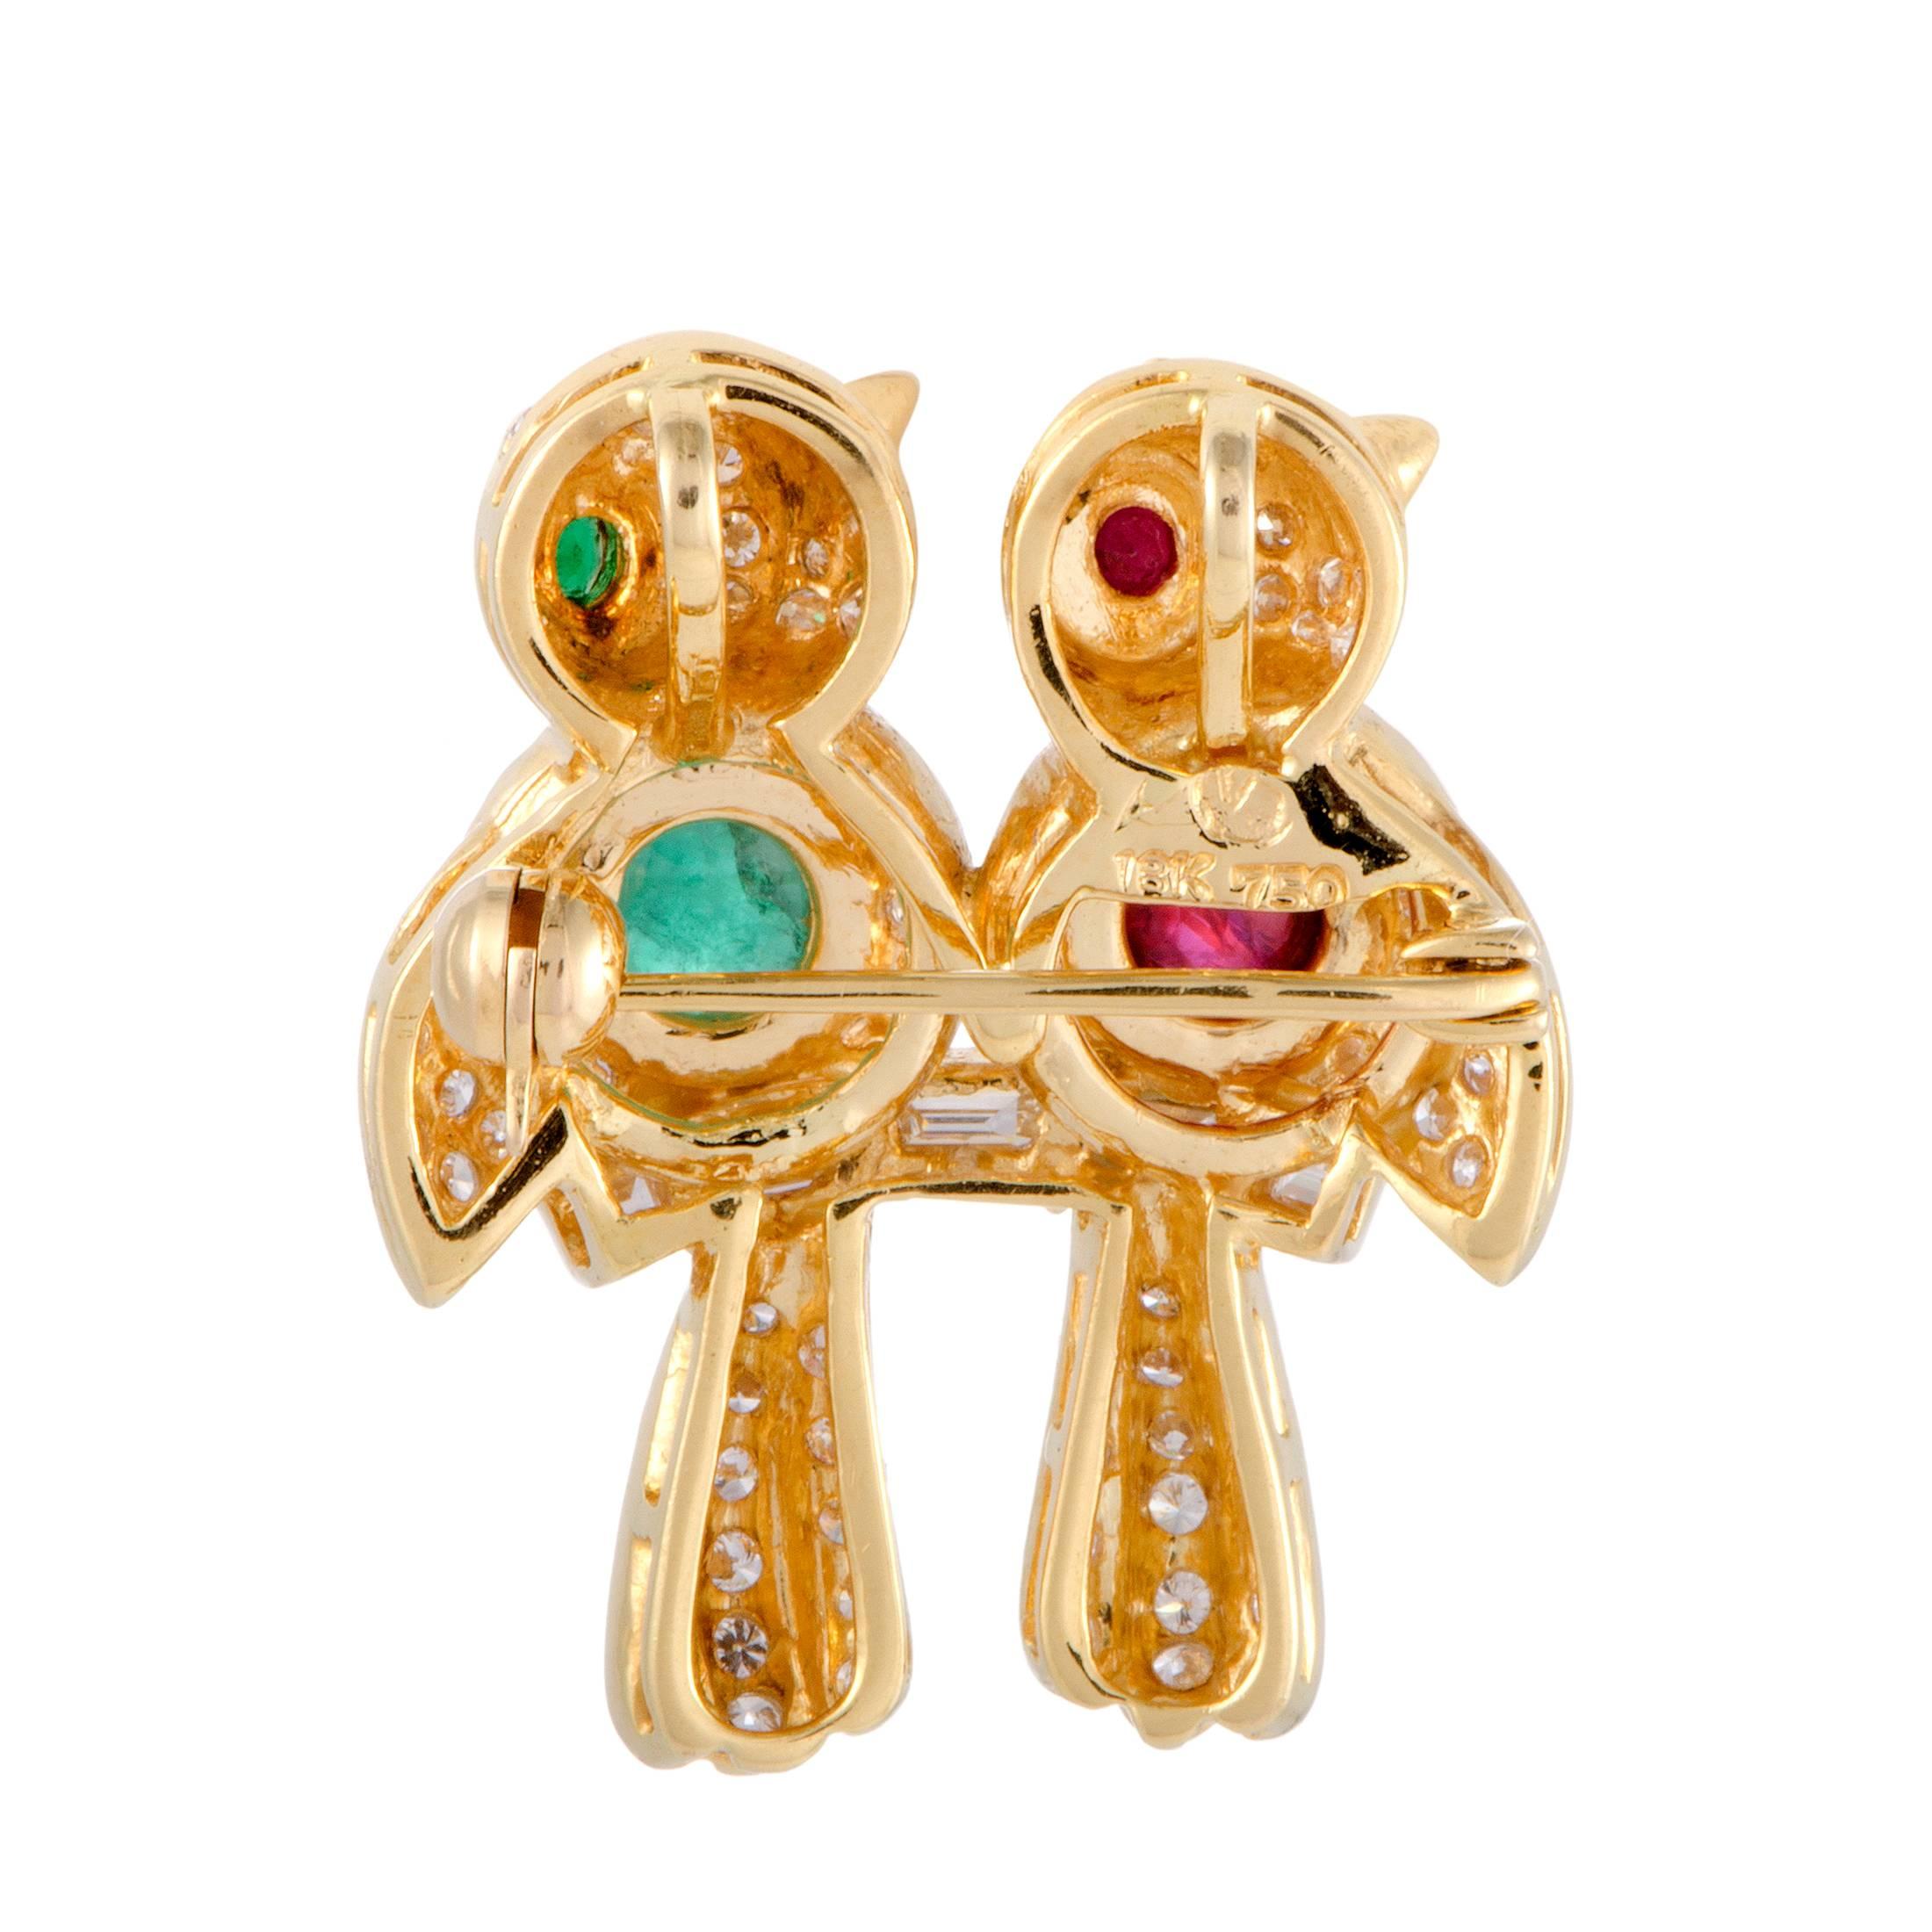 Bringing vivid color into a design of glamorous radiance, this exceptional 18K yellow gold brooch charmingly depicts cheerful birds by employing 0.55ct of rubies and 0.60ct of emeralds as well as 1.35 carats of glittering diamonds.
